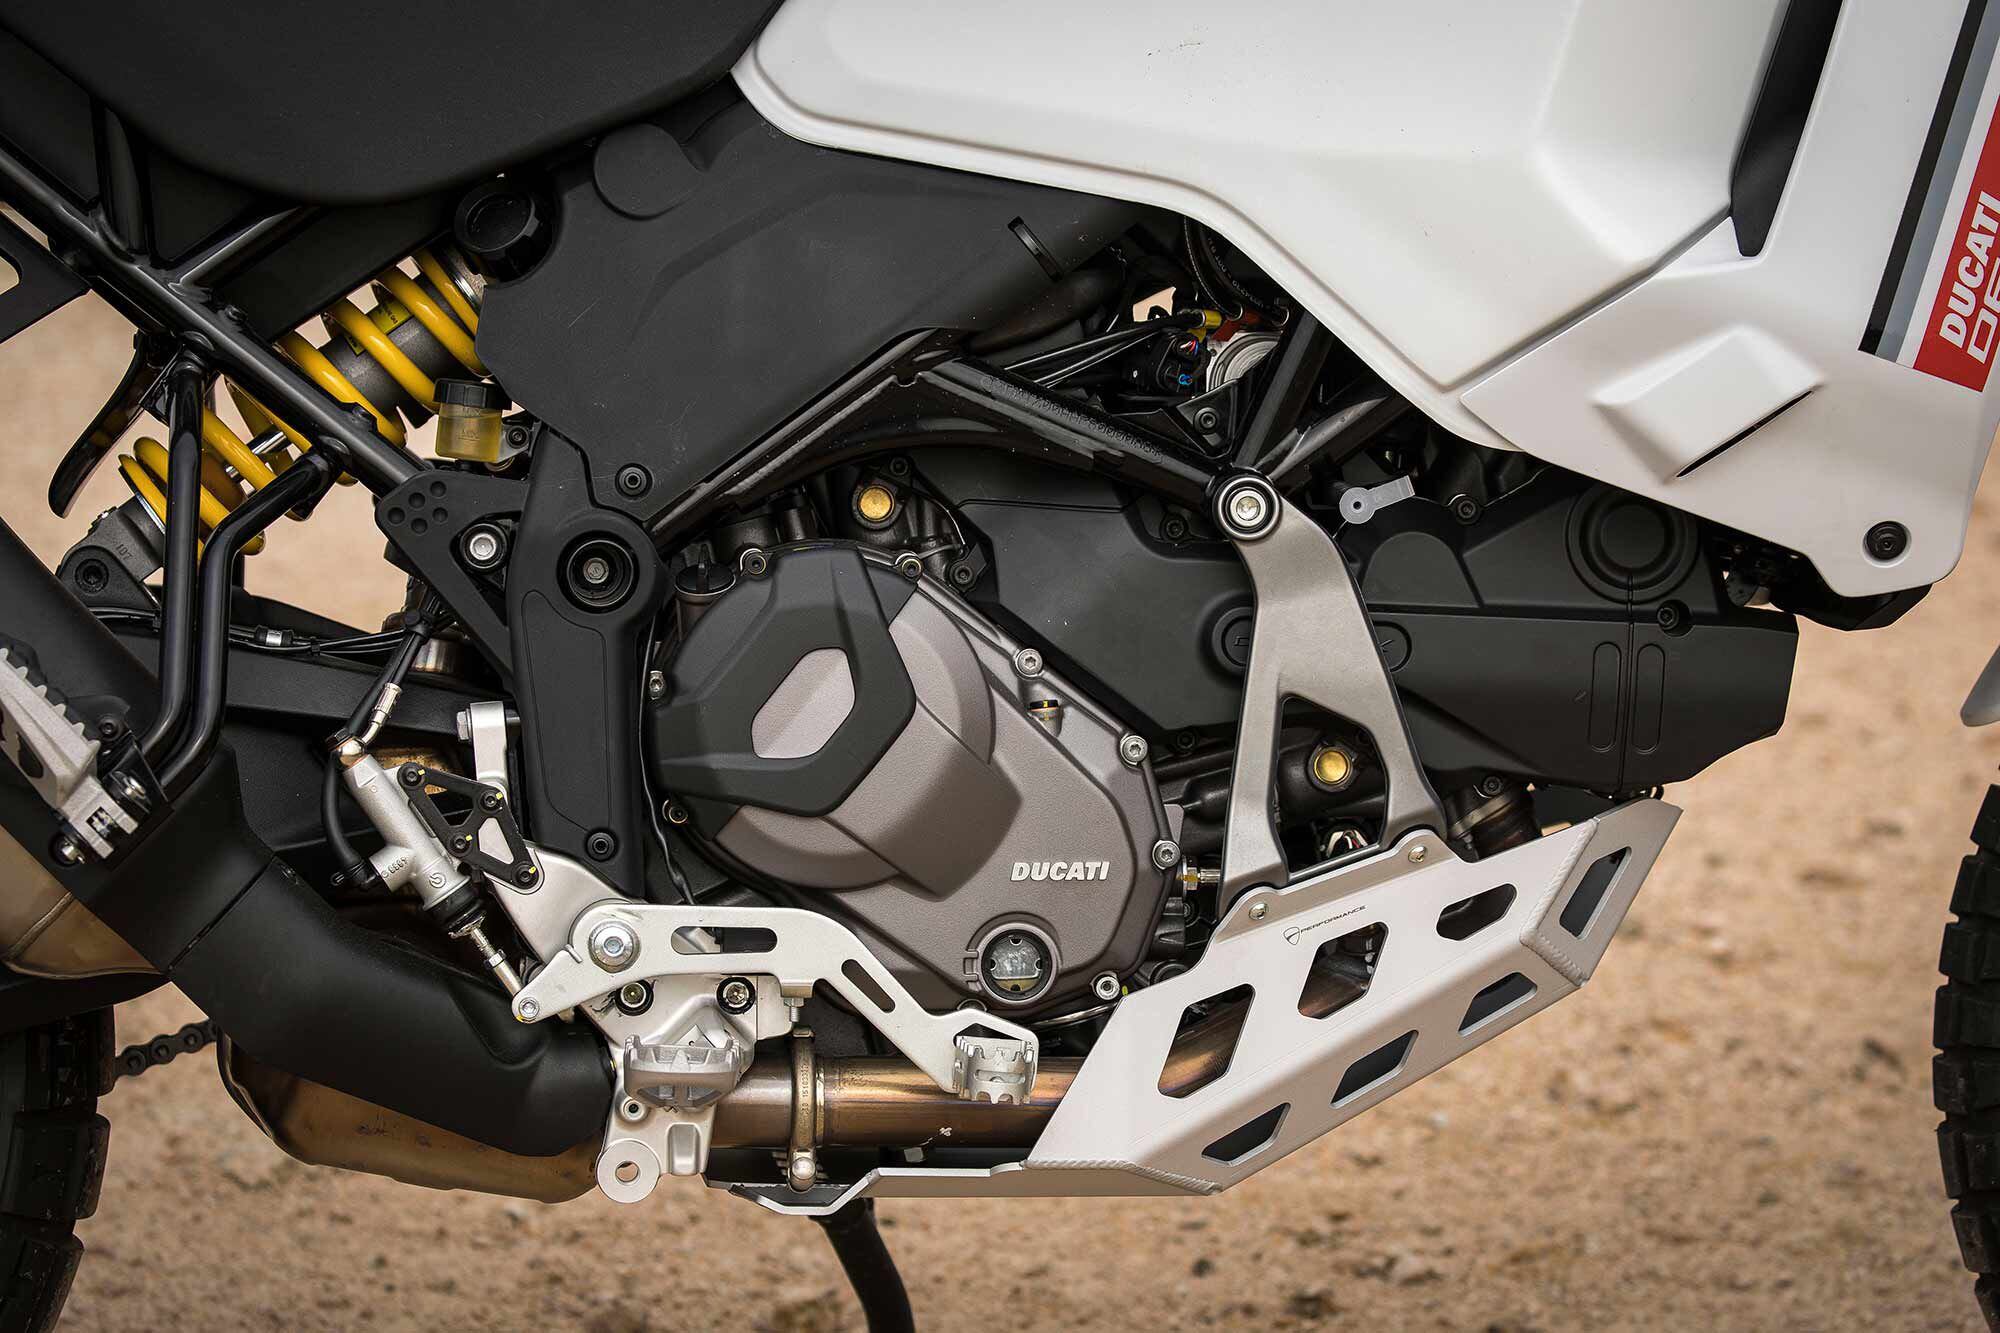 The 937cc engine is the same as used in the Multistrada V2, but with revised first and second gear ratios, a lower-ratio final drive, and fresh calibration designed to deliver as wide a spread of power as possible.